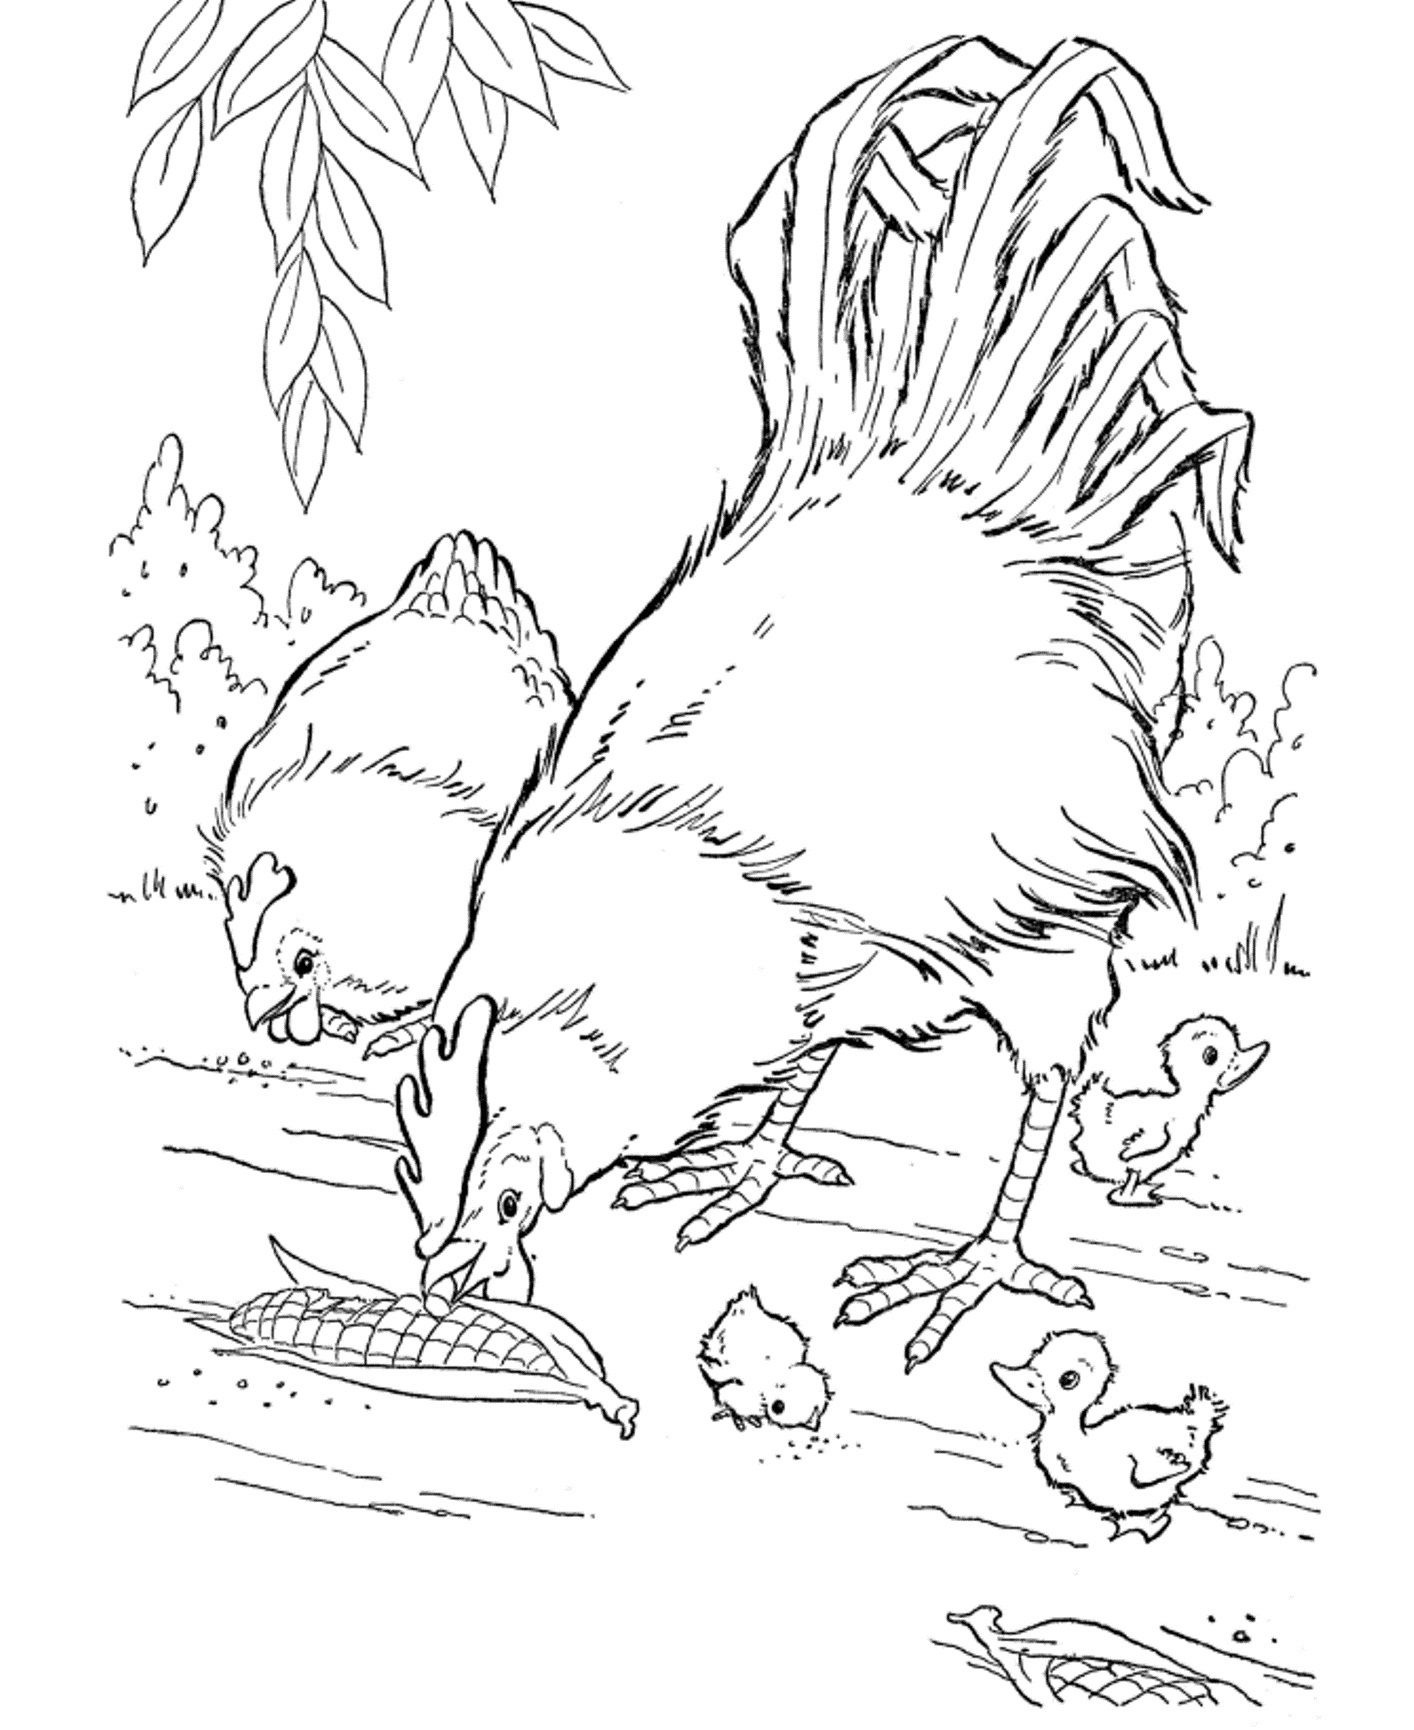 Free Printable Farm Animal Coloring Pages For Kids | Adult Coloring - Free Printable Farm Animal Pictures